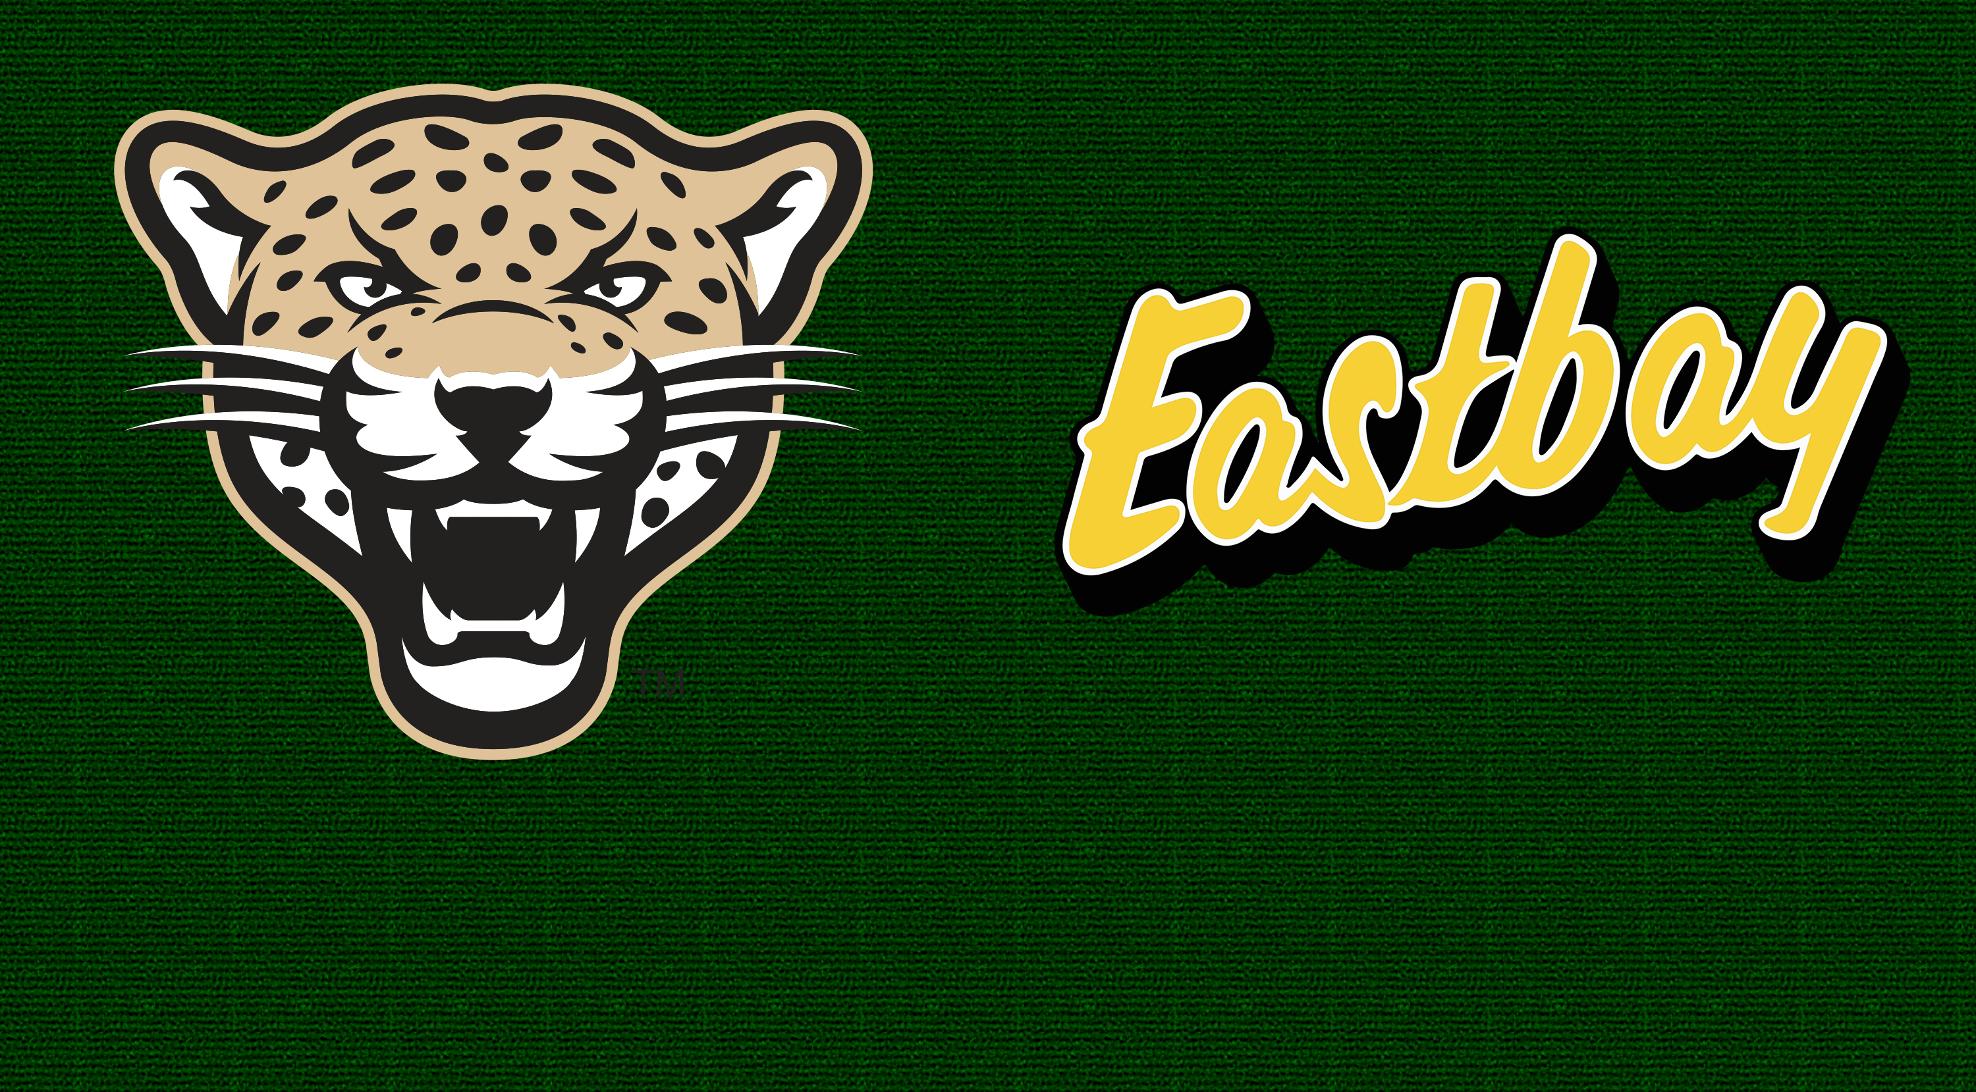 La Verne Athletics partners with Eastbay